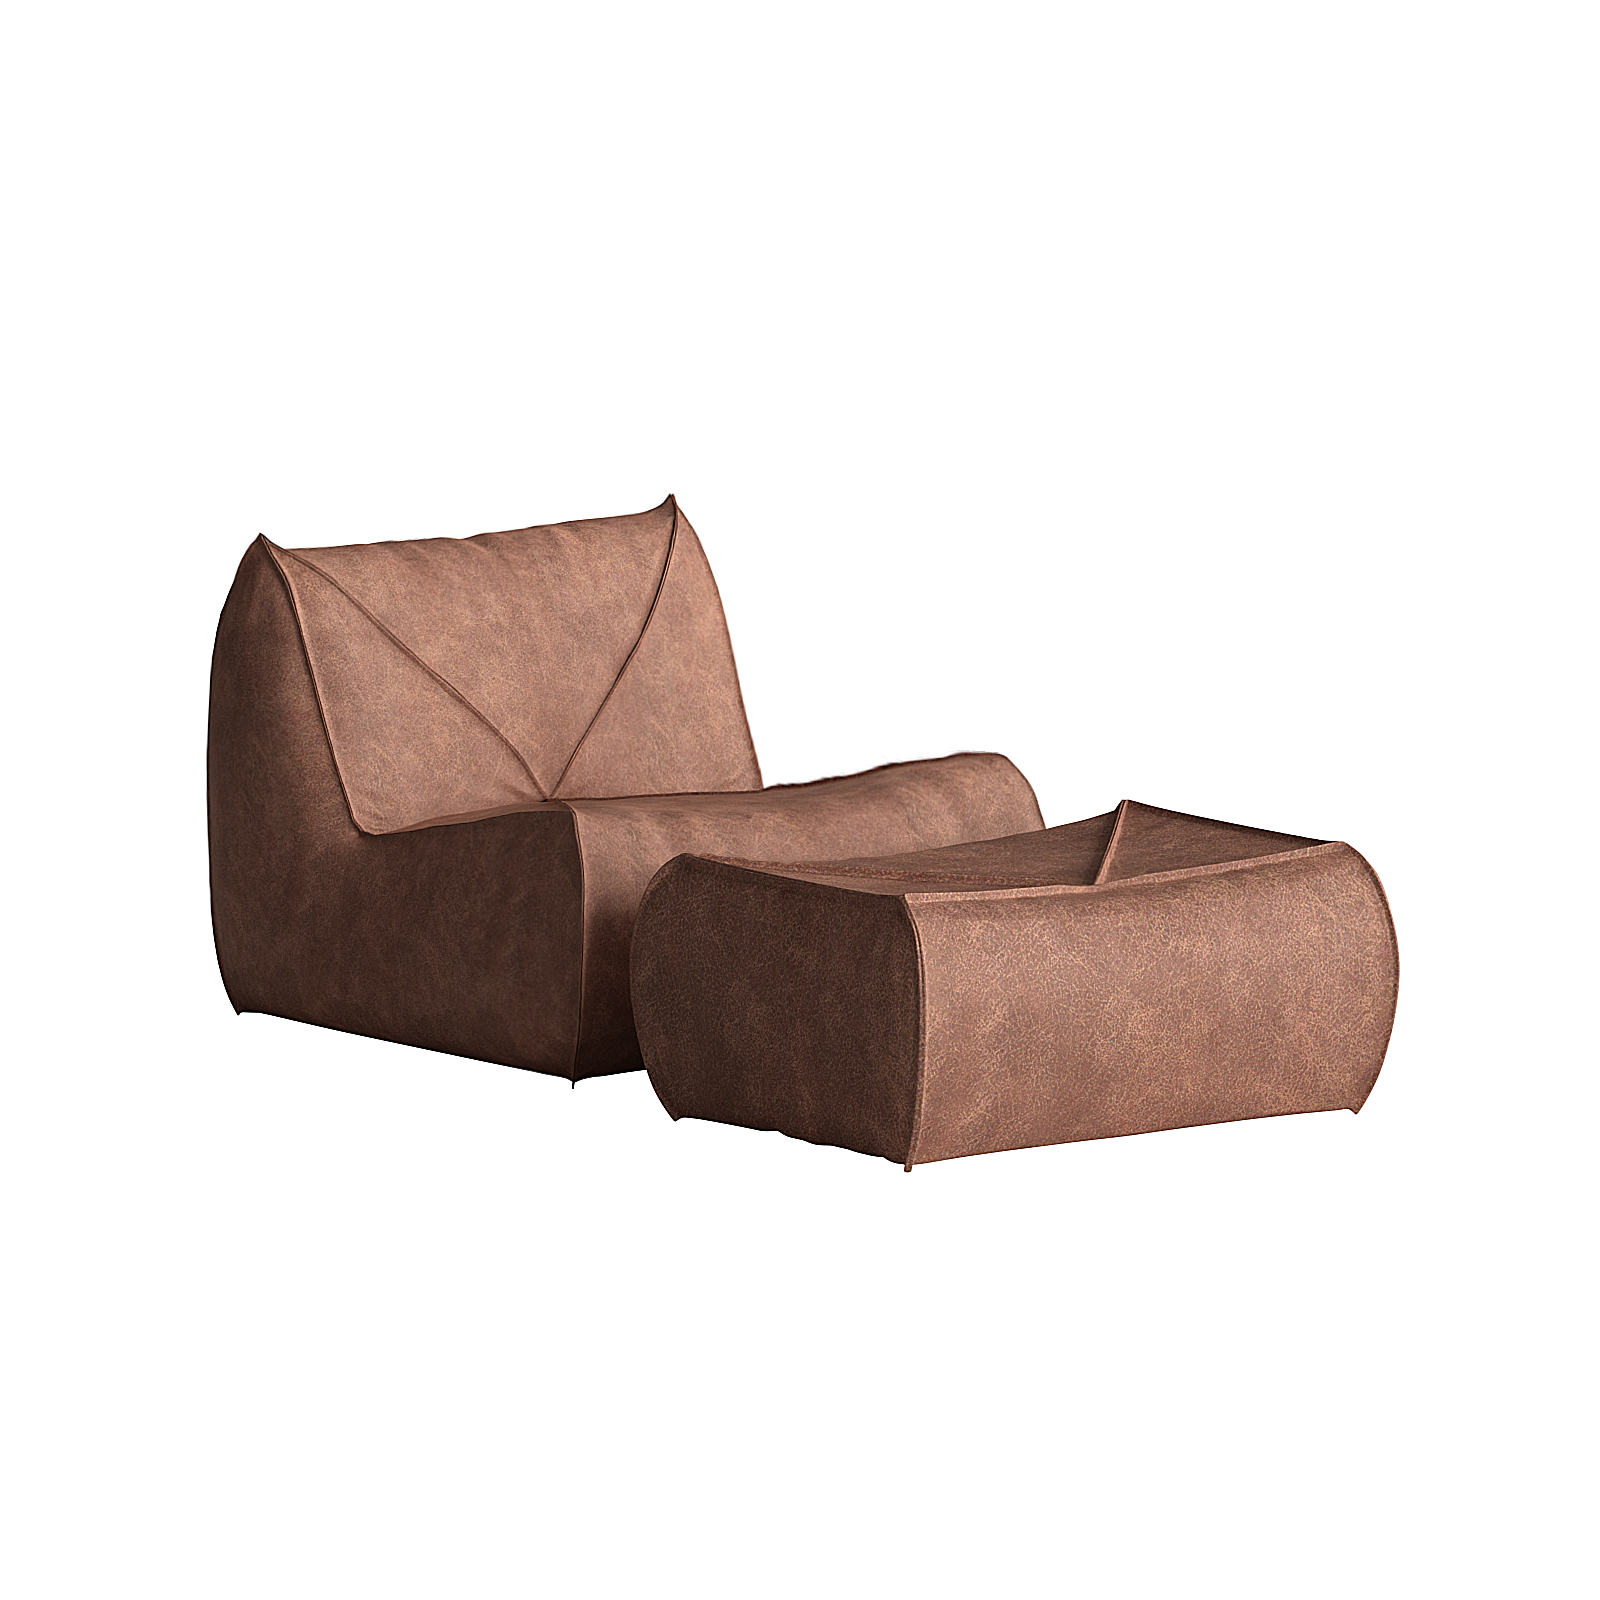 Zong Sofa / French Seam - 1-Seater